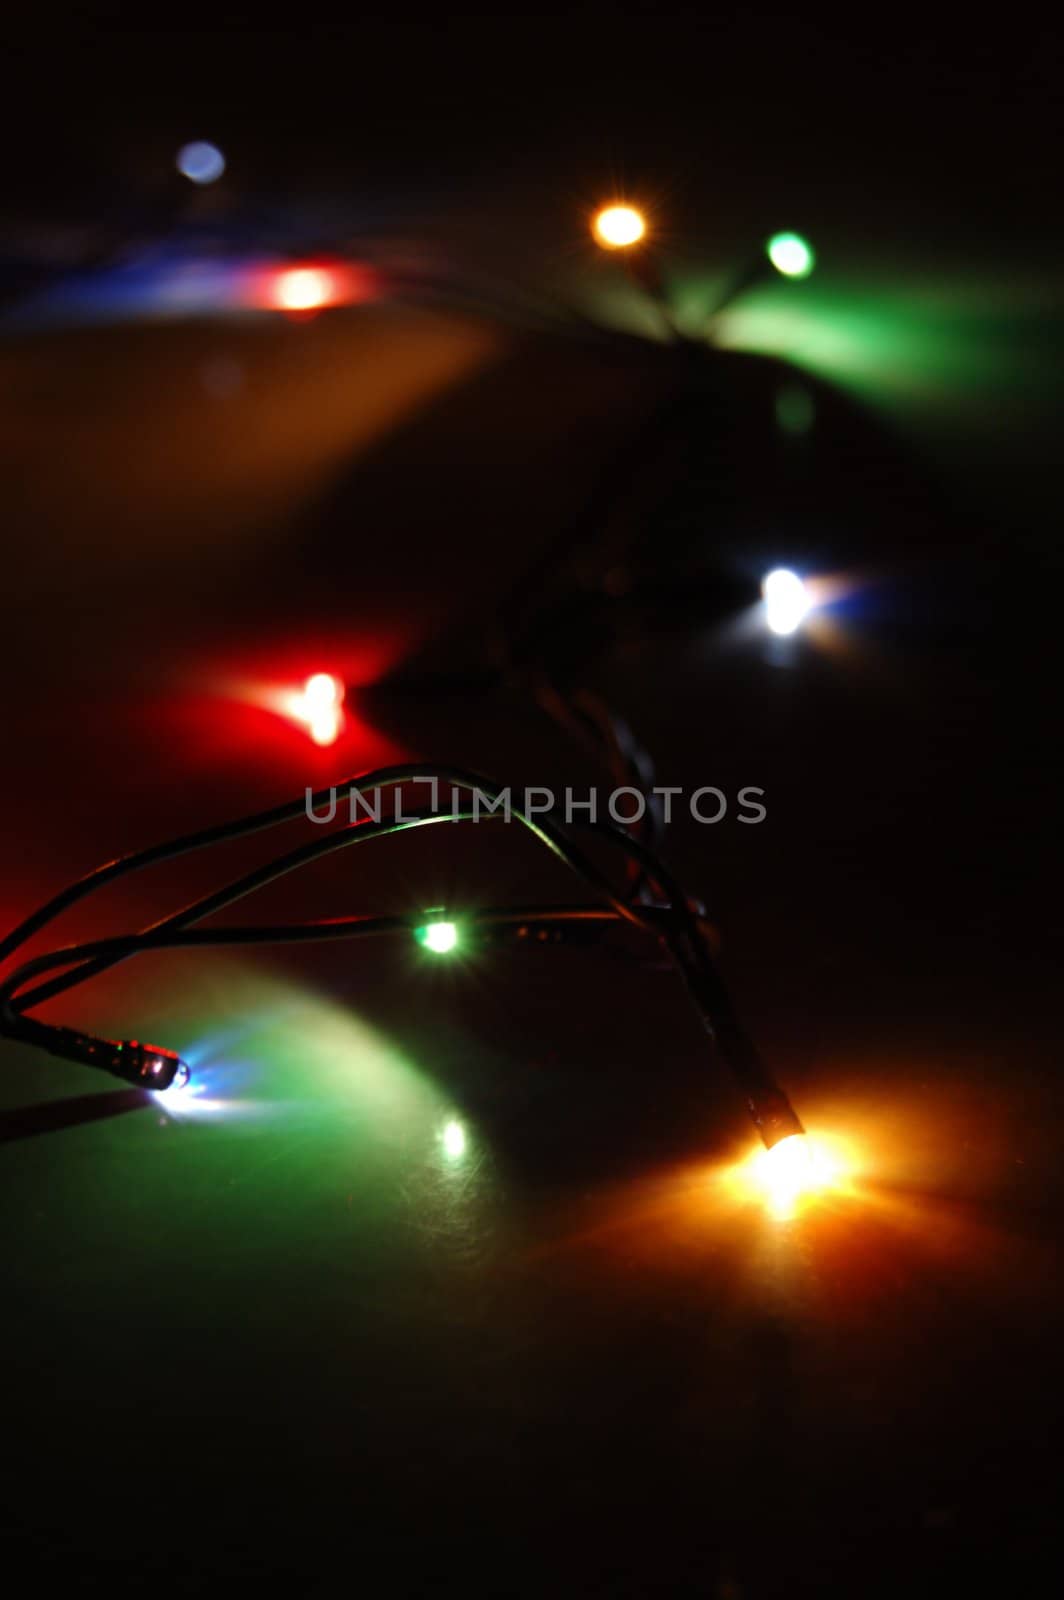 colourful glowing holiday lights decoration